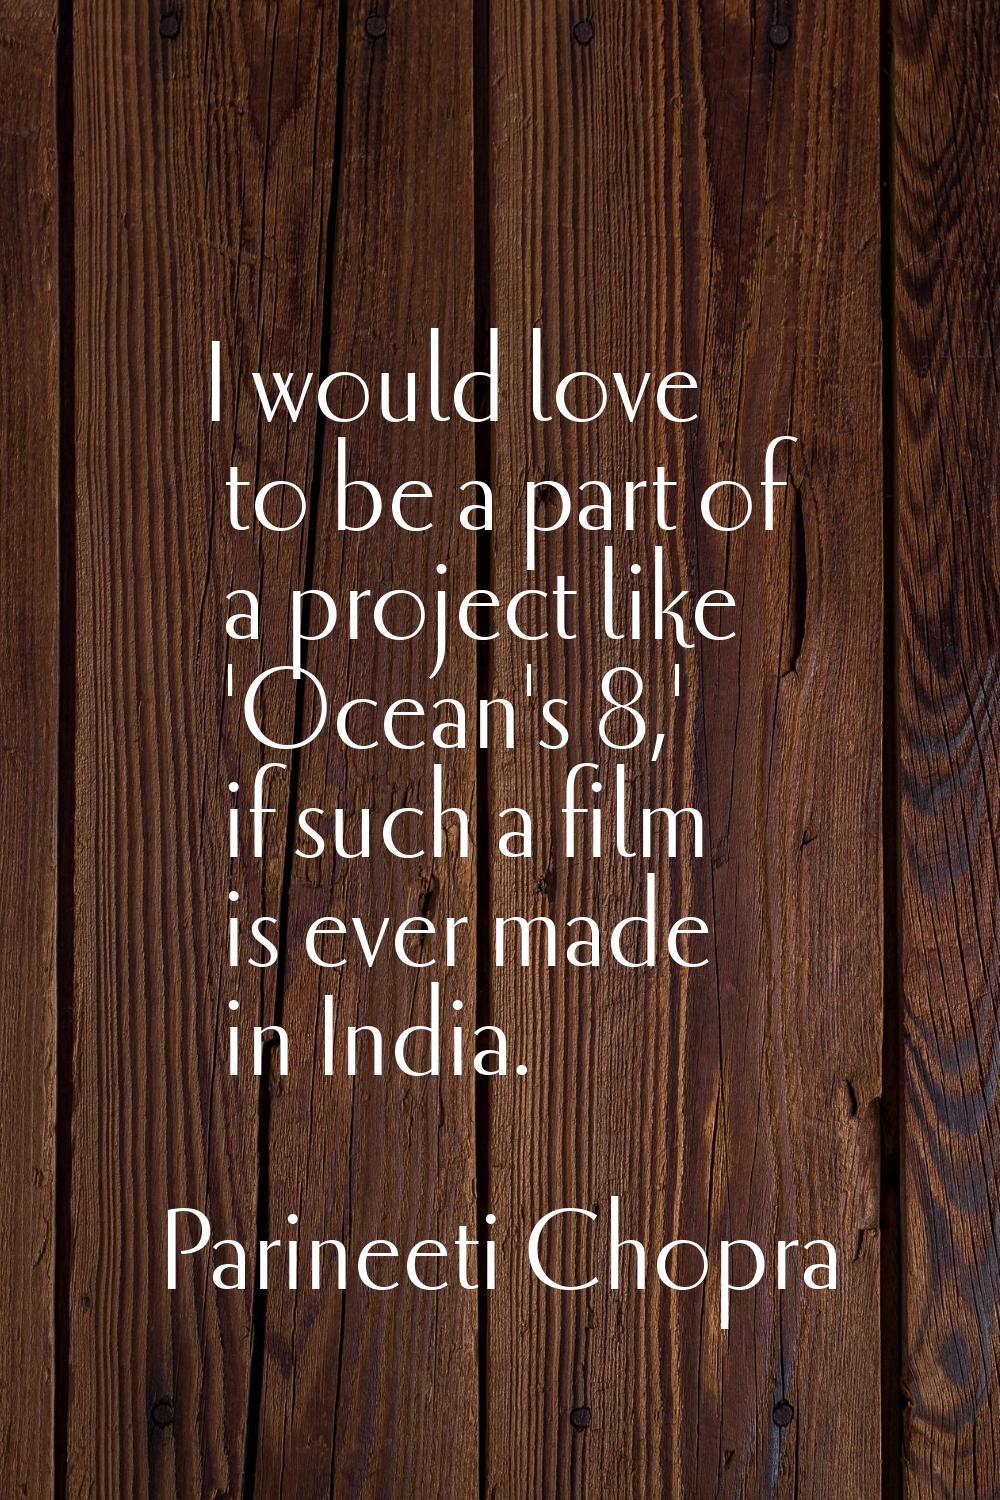 I would love to be a part of a project like 'Ocean's 8,' if such a film is ever made in India.